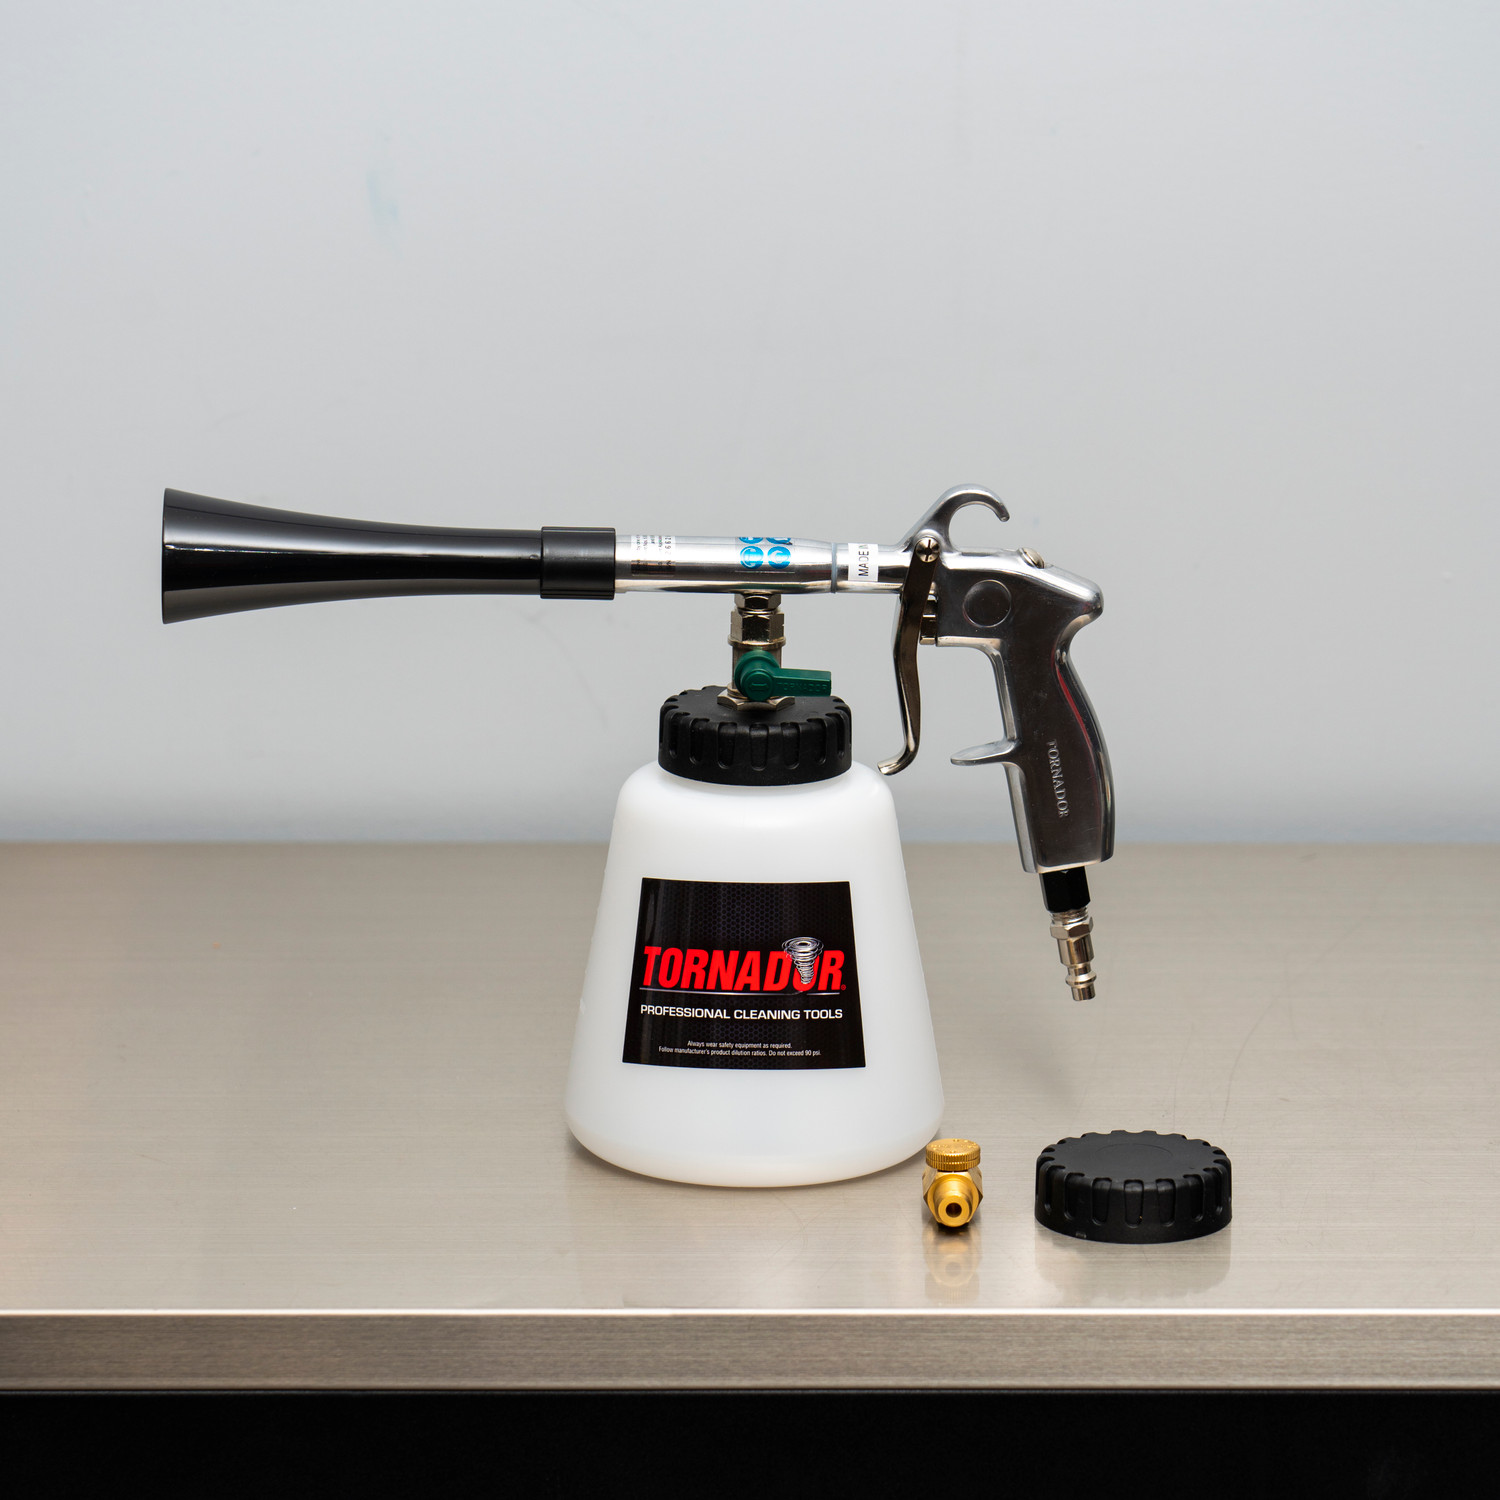 TORNADOR FOAM GUN. Professional Detailing Products, Because Your